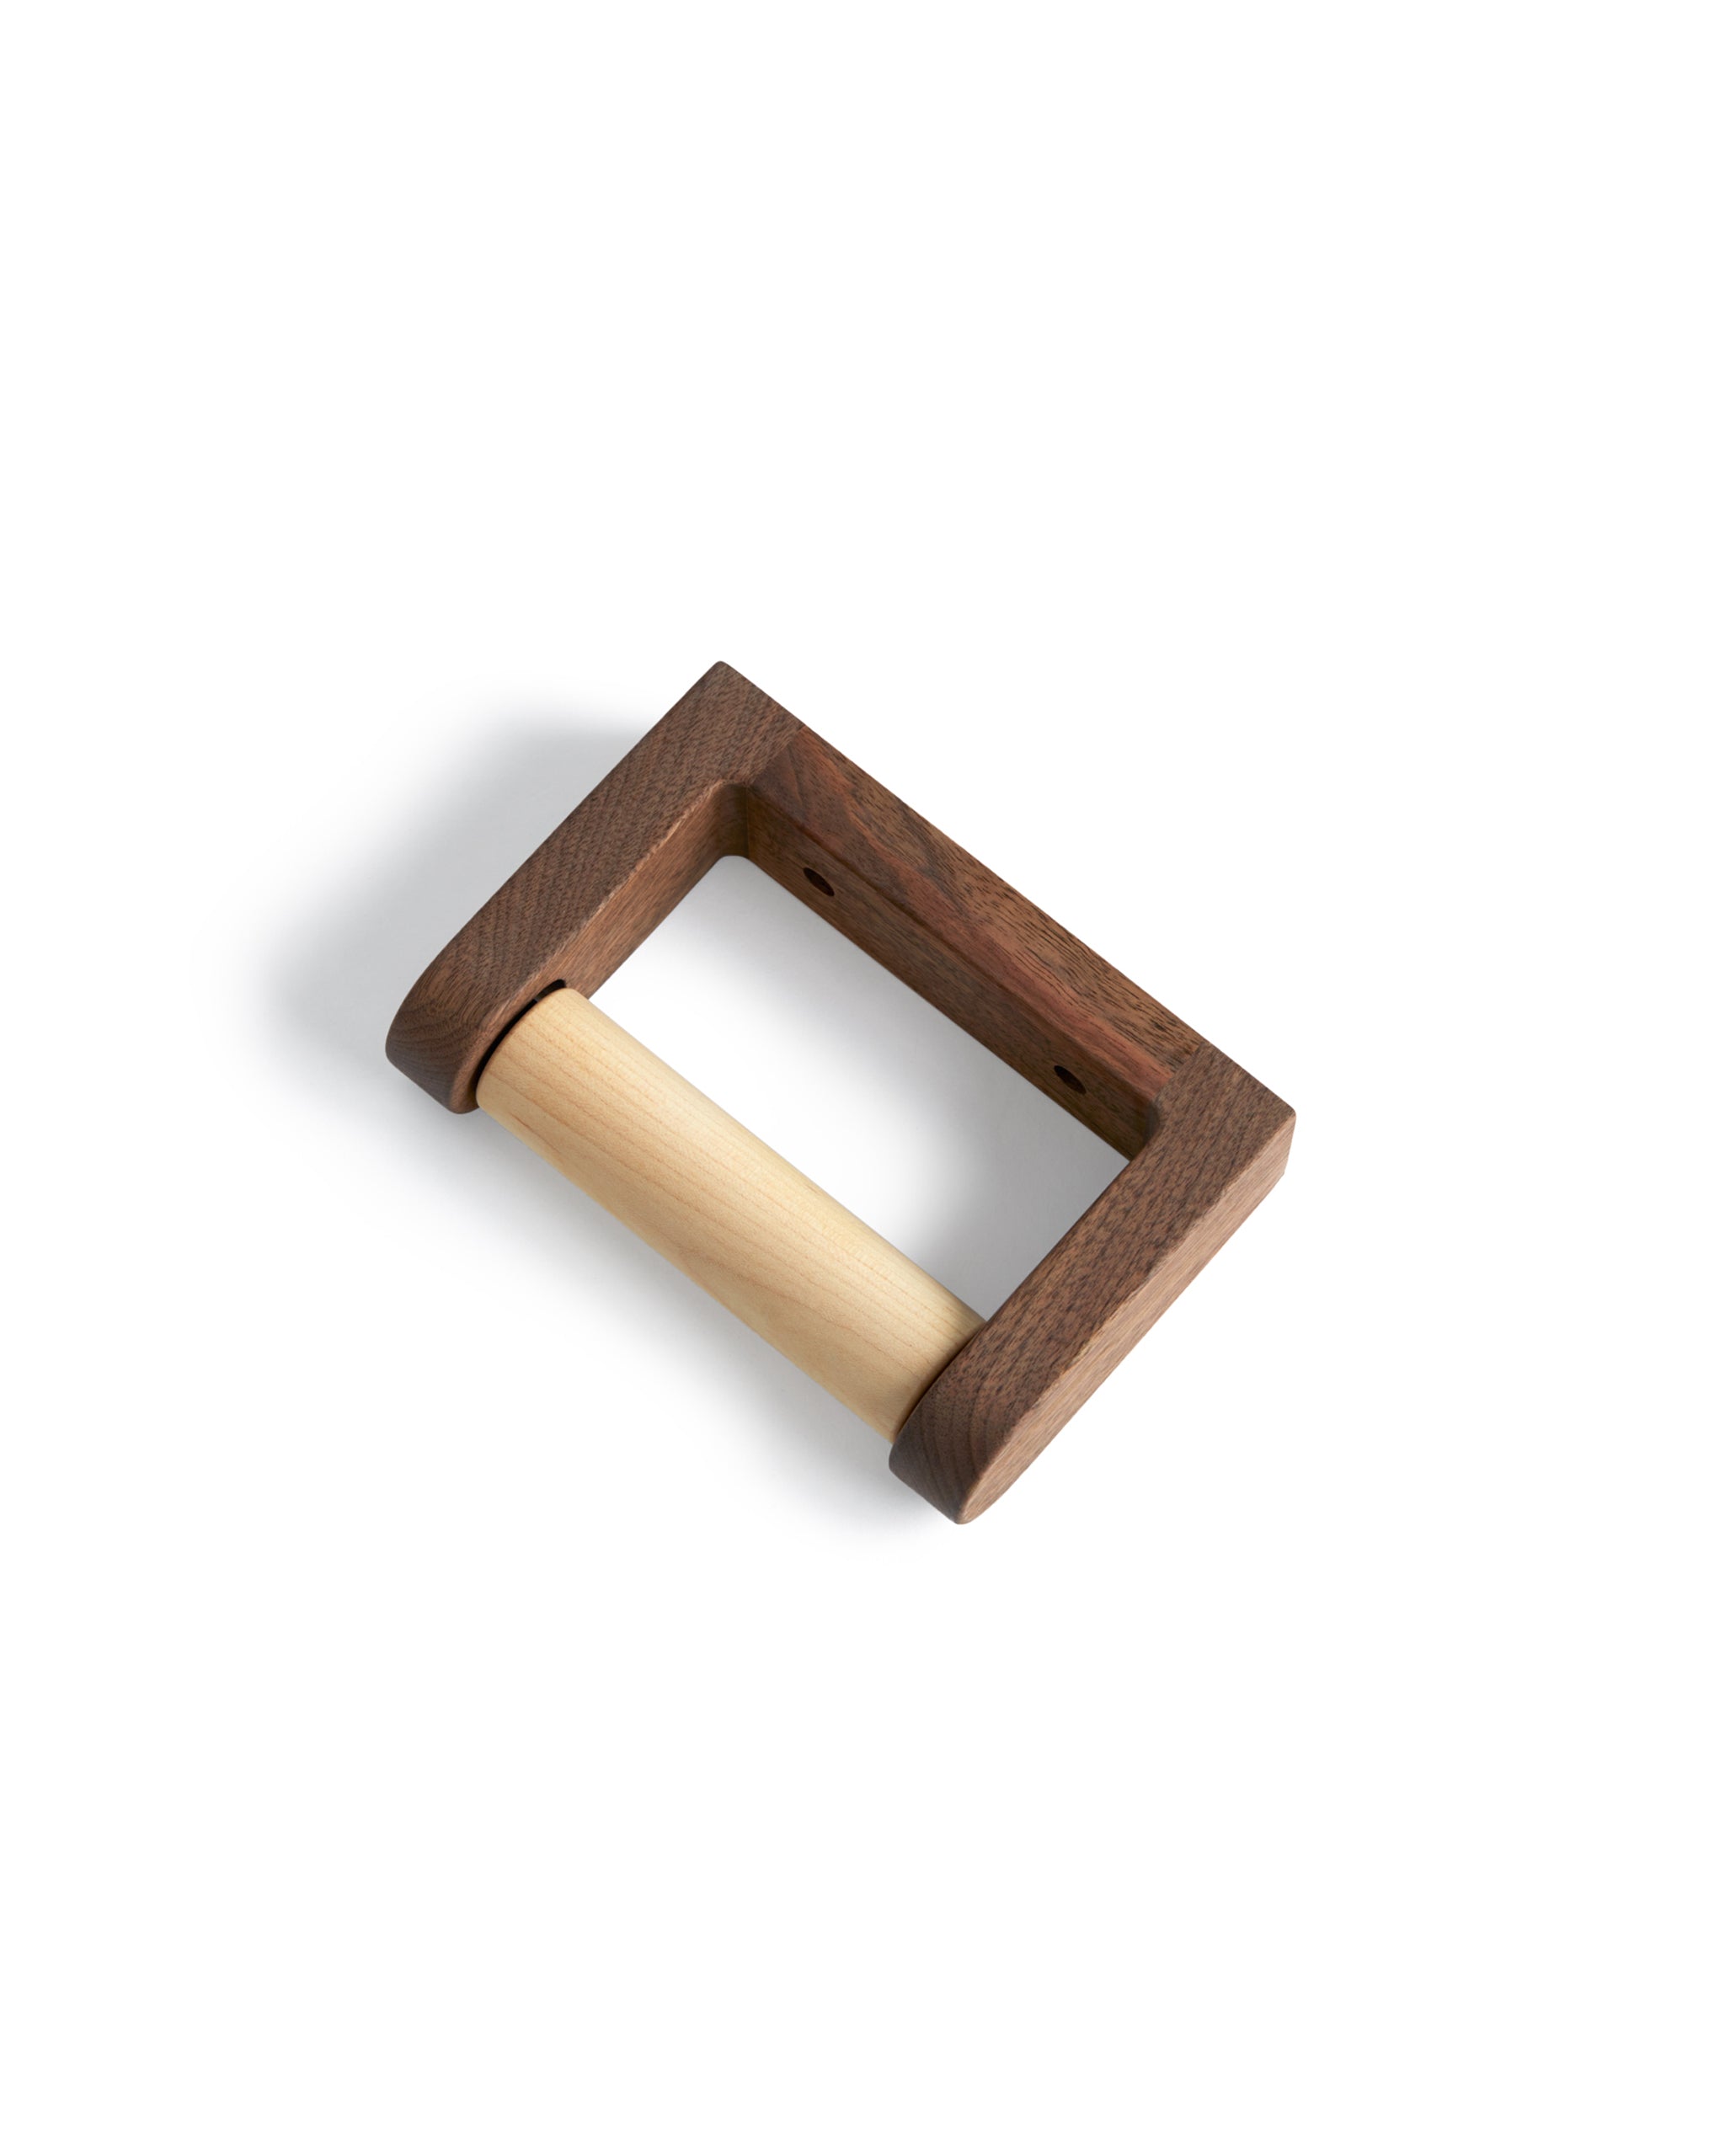 Red Oak Toilet Paper Holder With Shelf